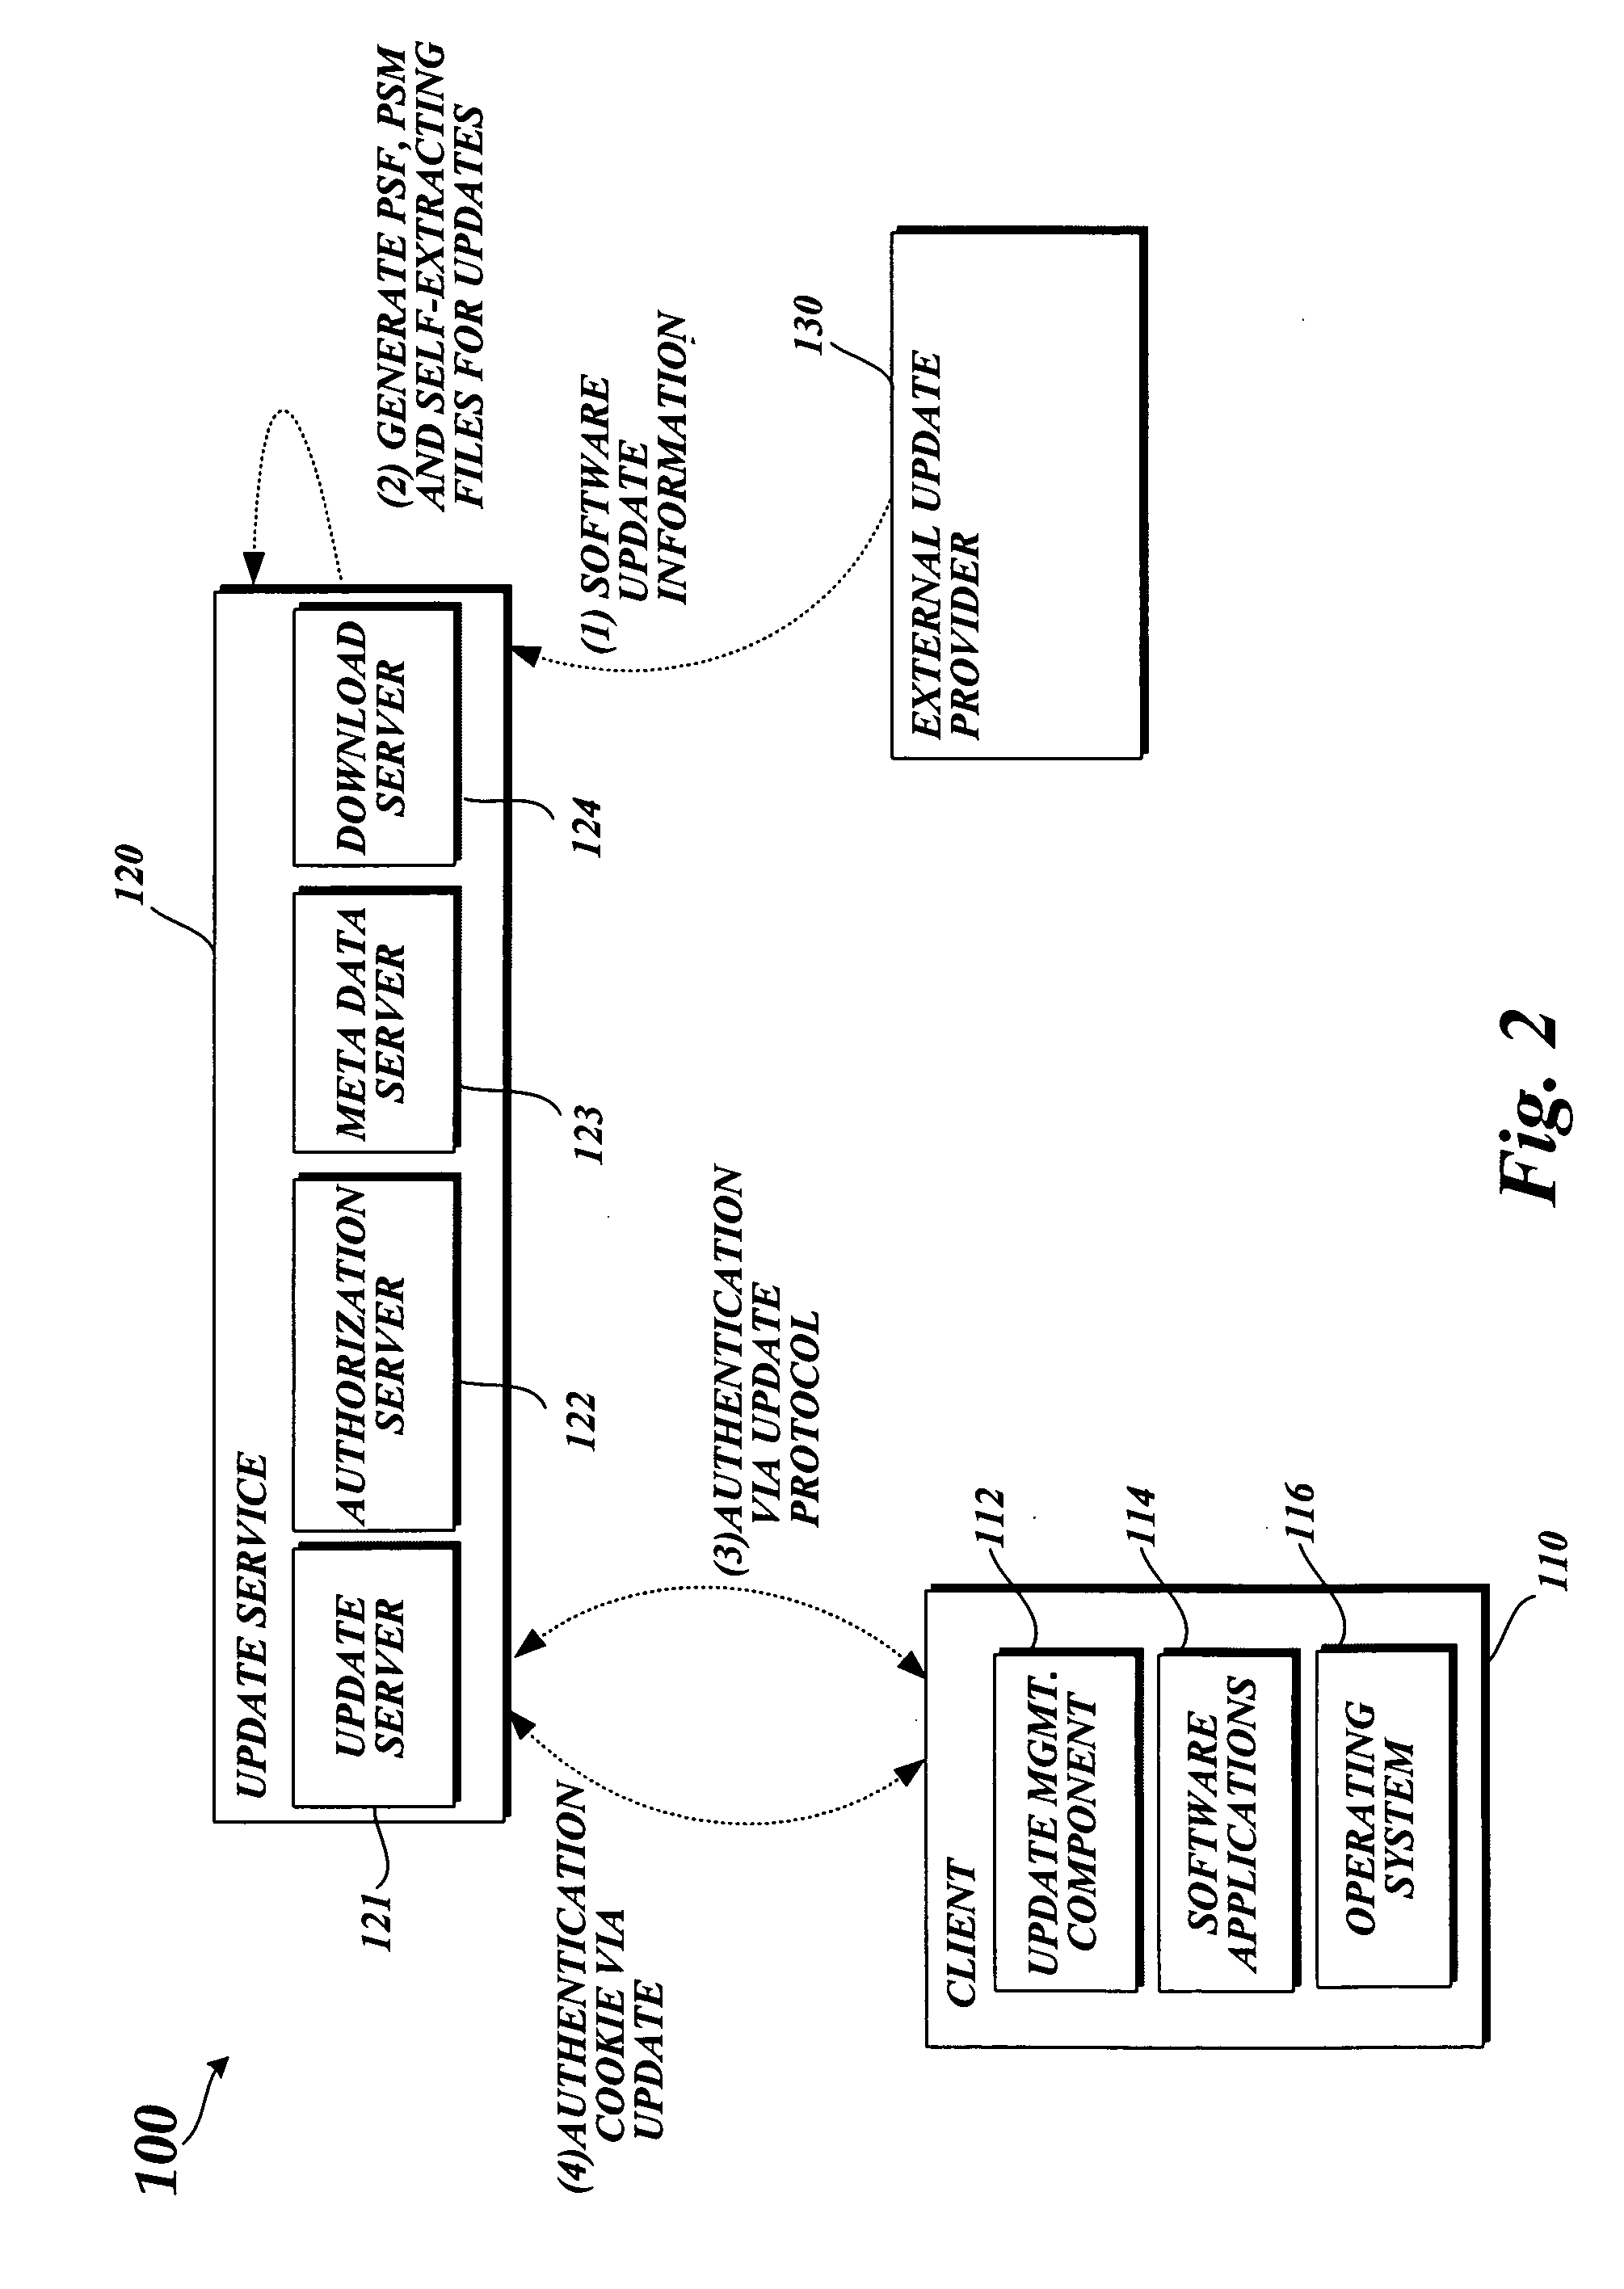 System and method for updating installation components in a networked environment